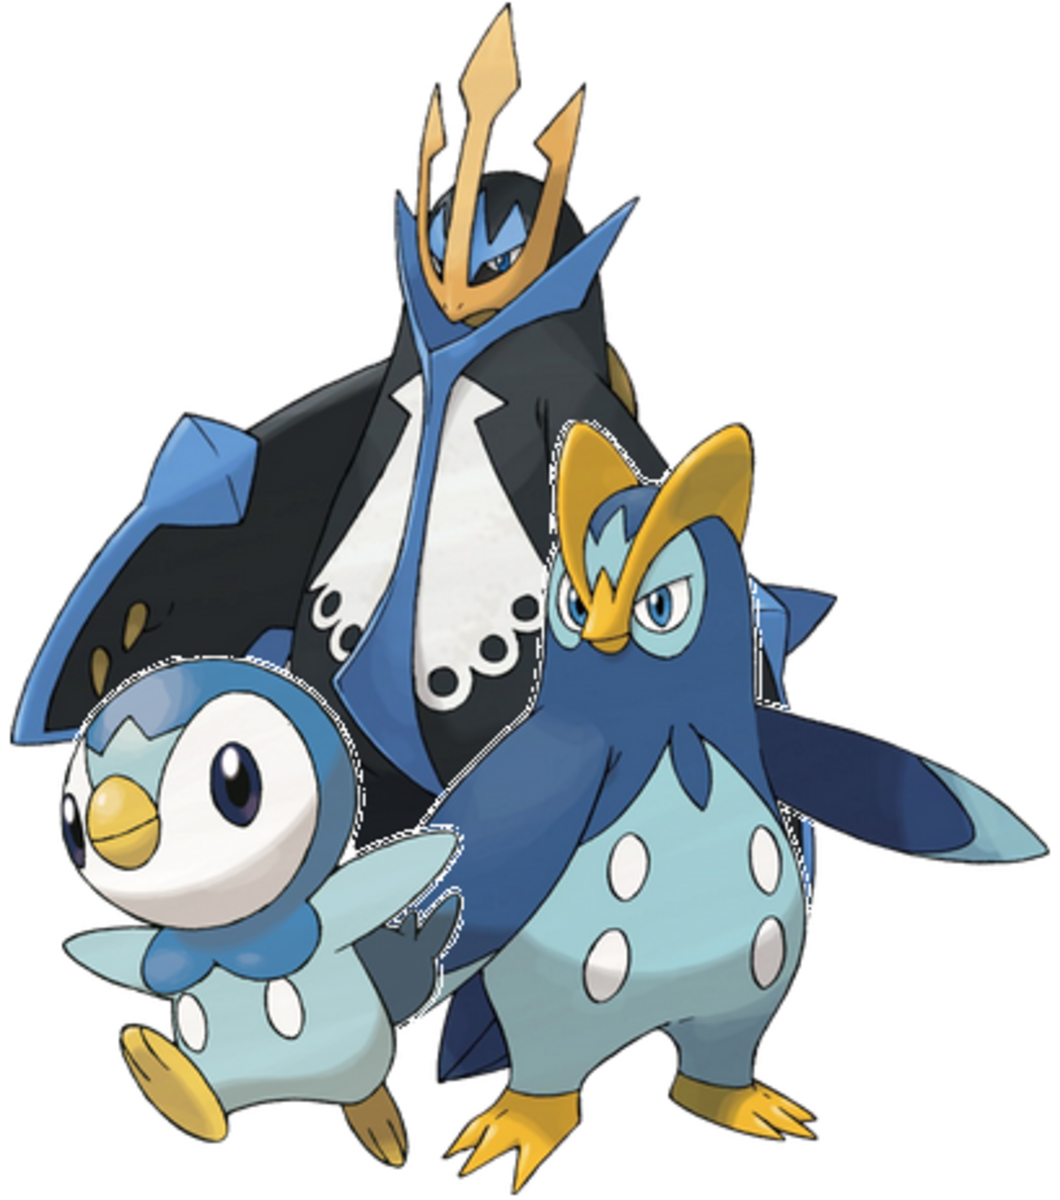 Piplup, Prinplup, and Empoleon